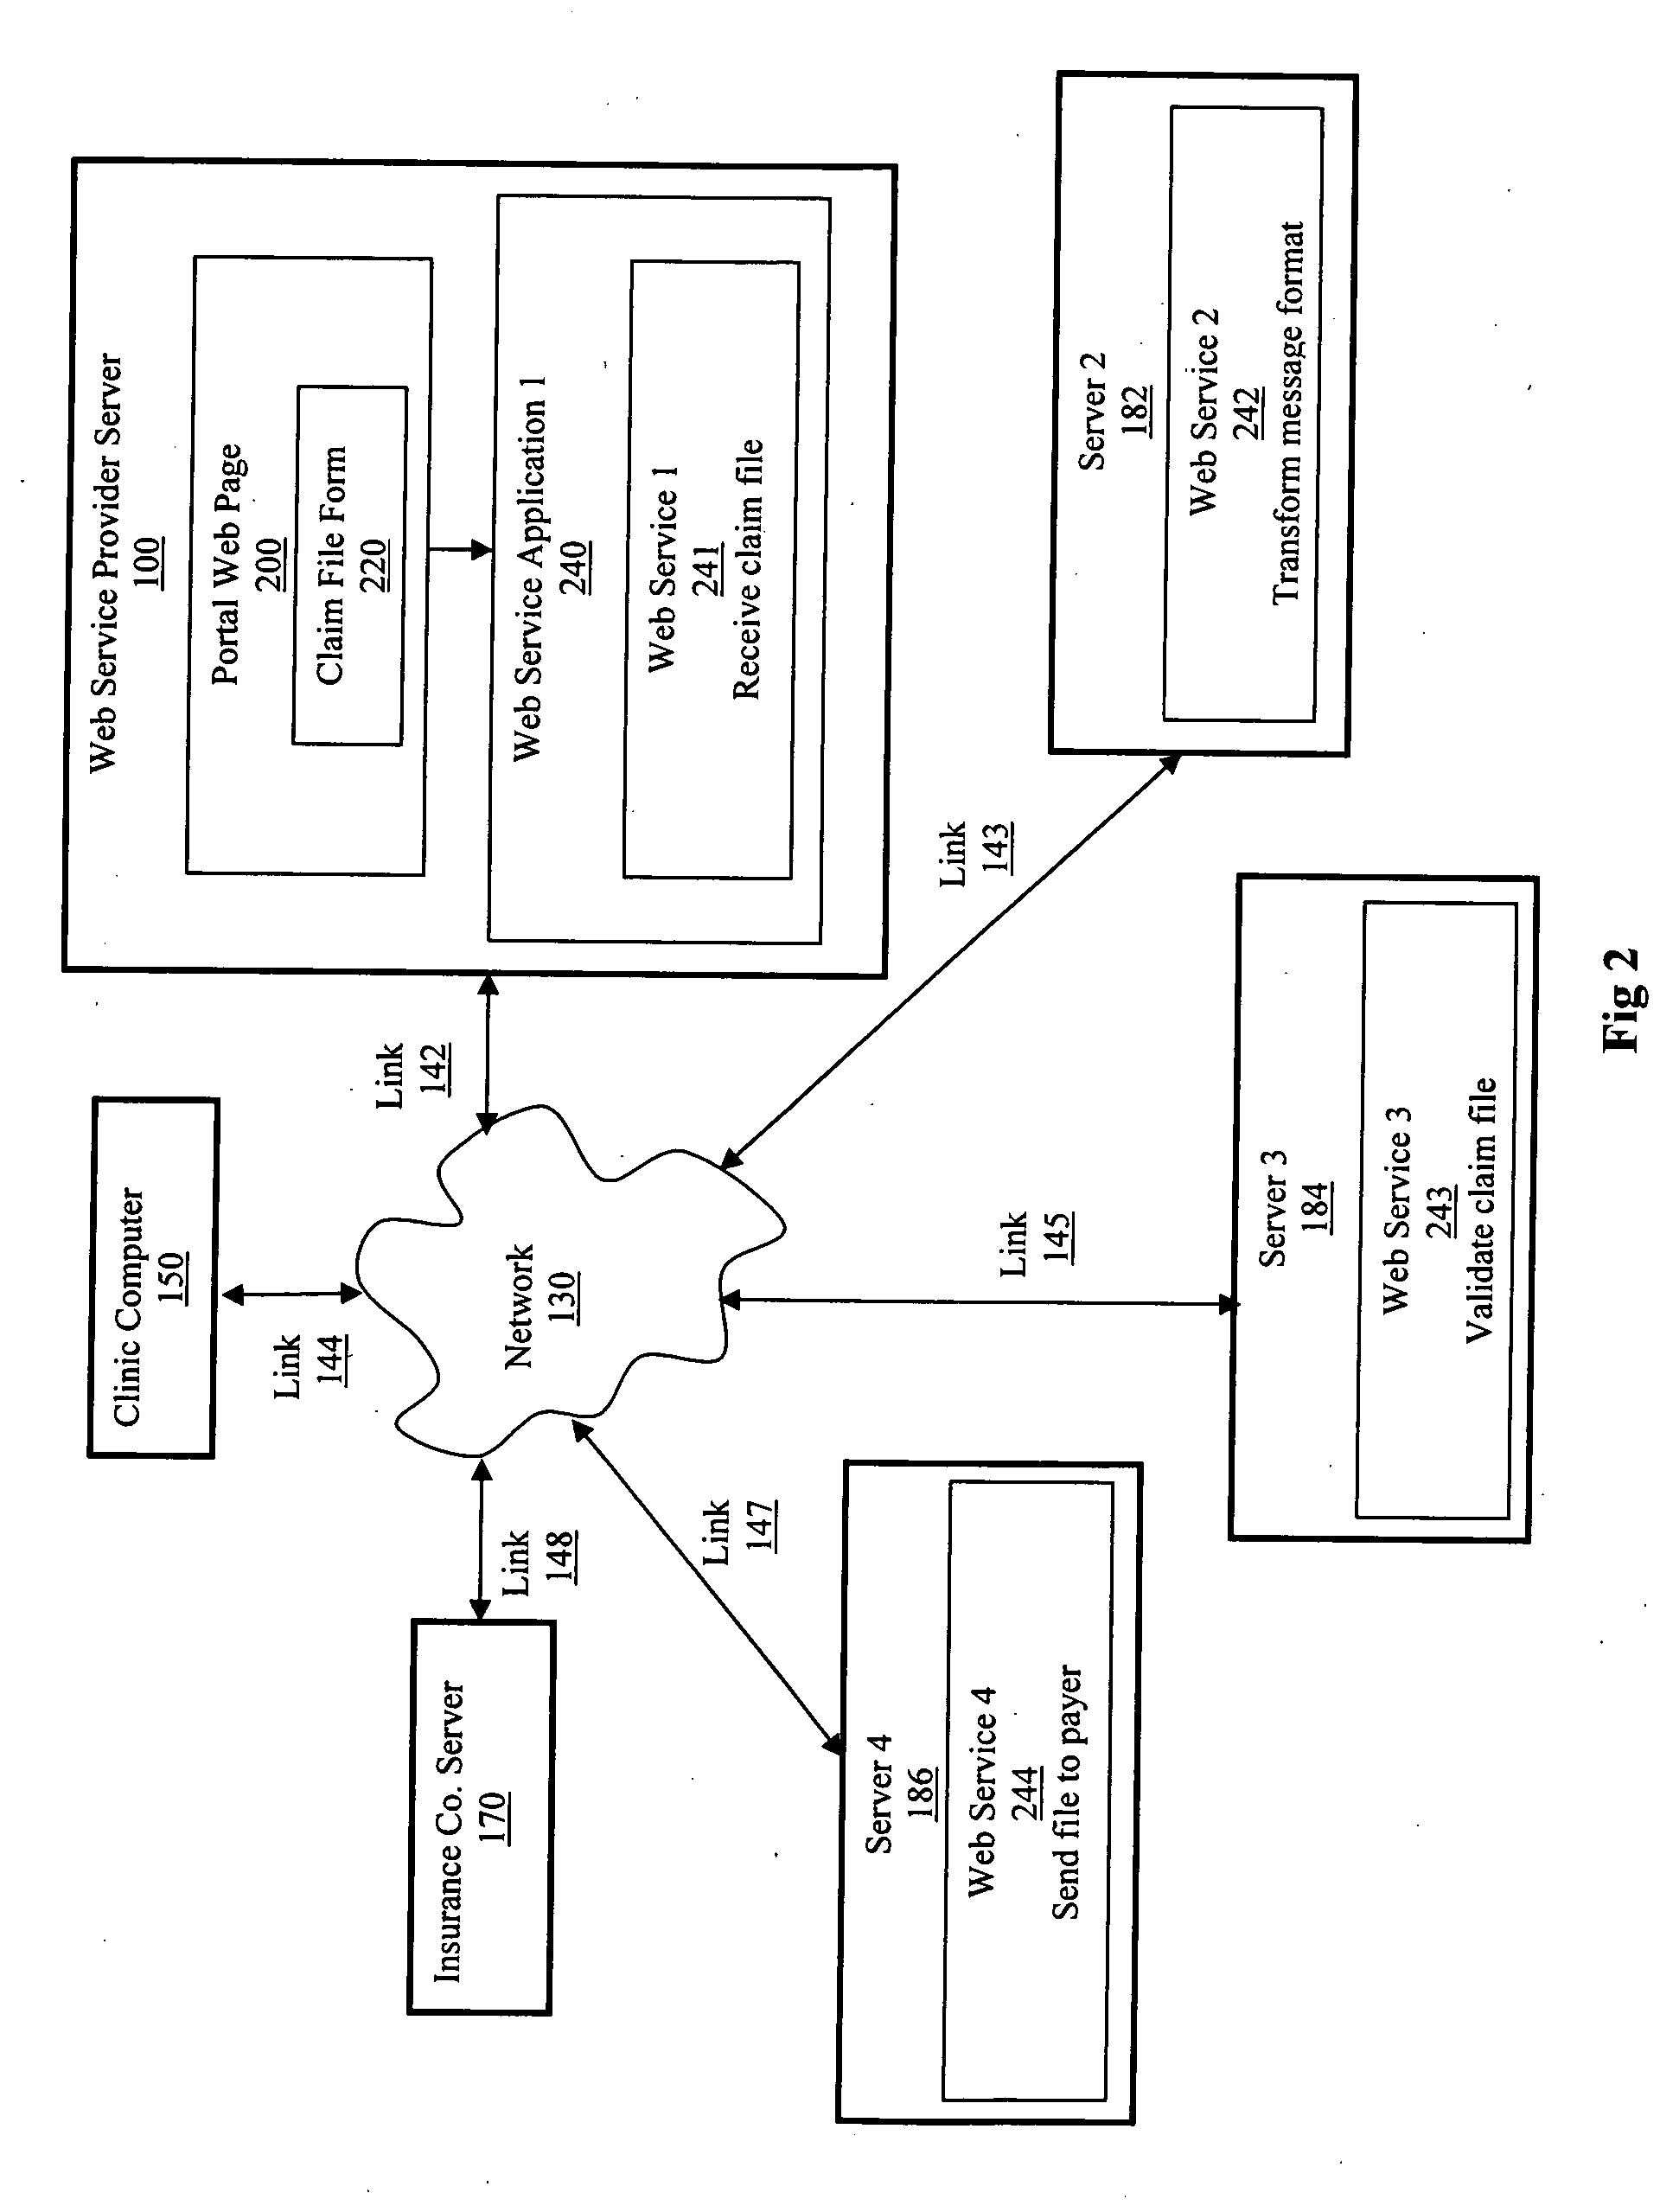 System and method for a packaging and deployment mechanism for Web service applications